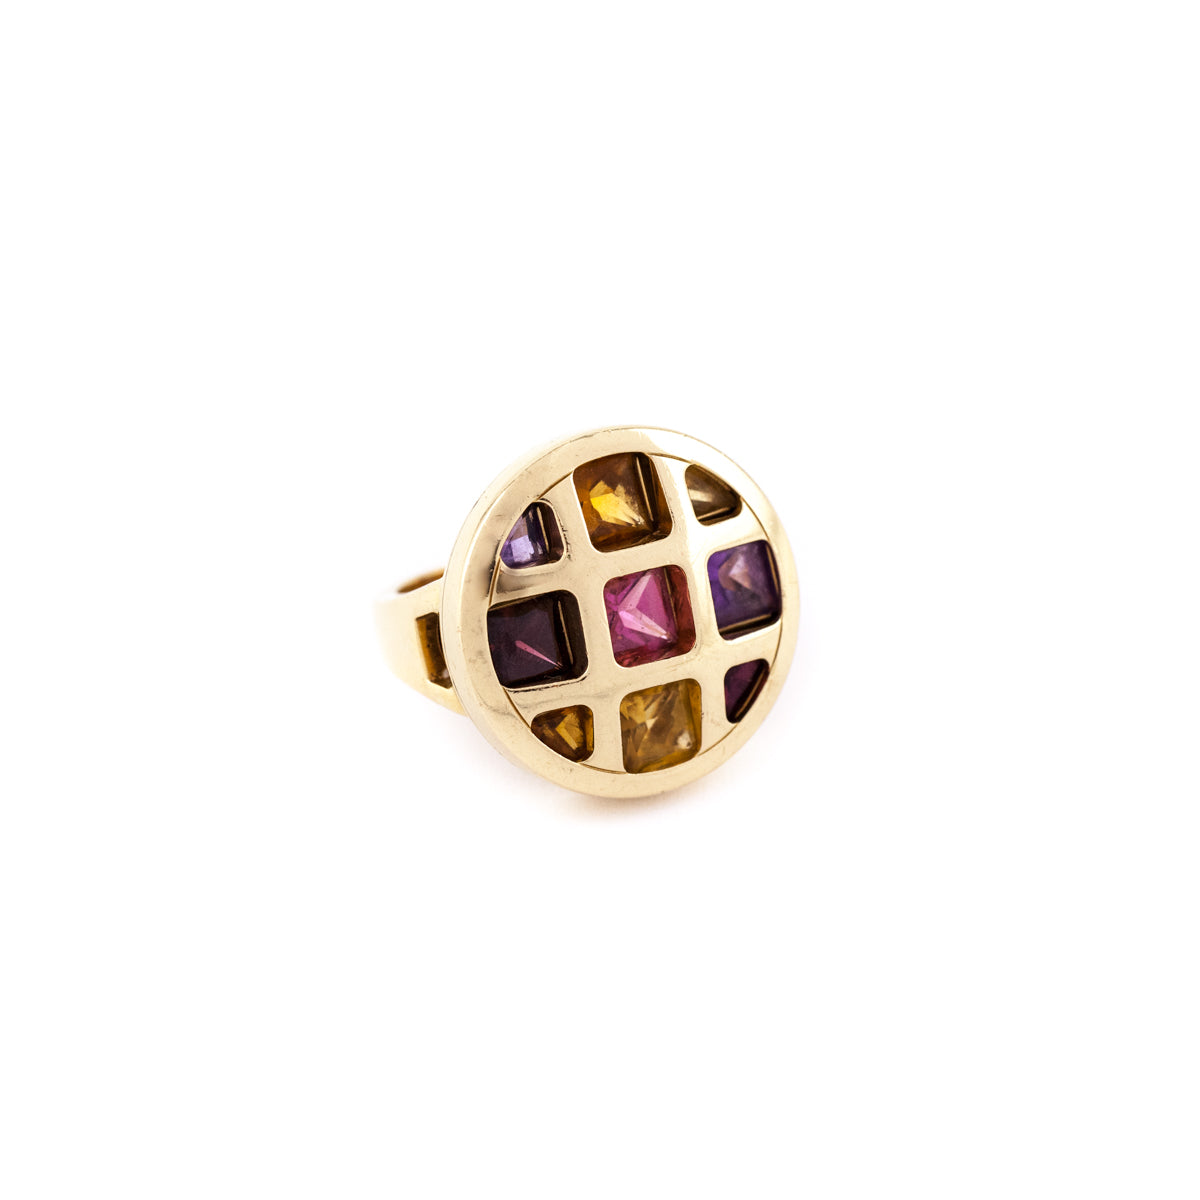 Cartier 18K Gold Multi Gemstone Pasha Ring Size 8.5 - Love that Bag etc - Preowned Authentic Designer Handbags & Preloved Fashions